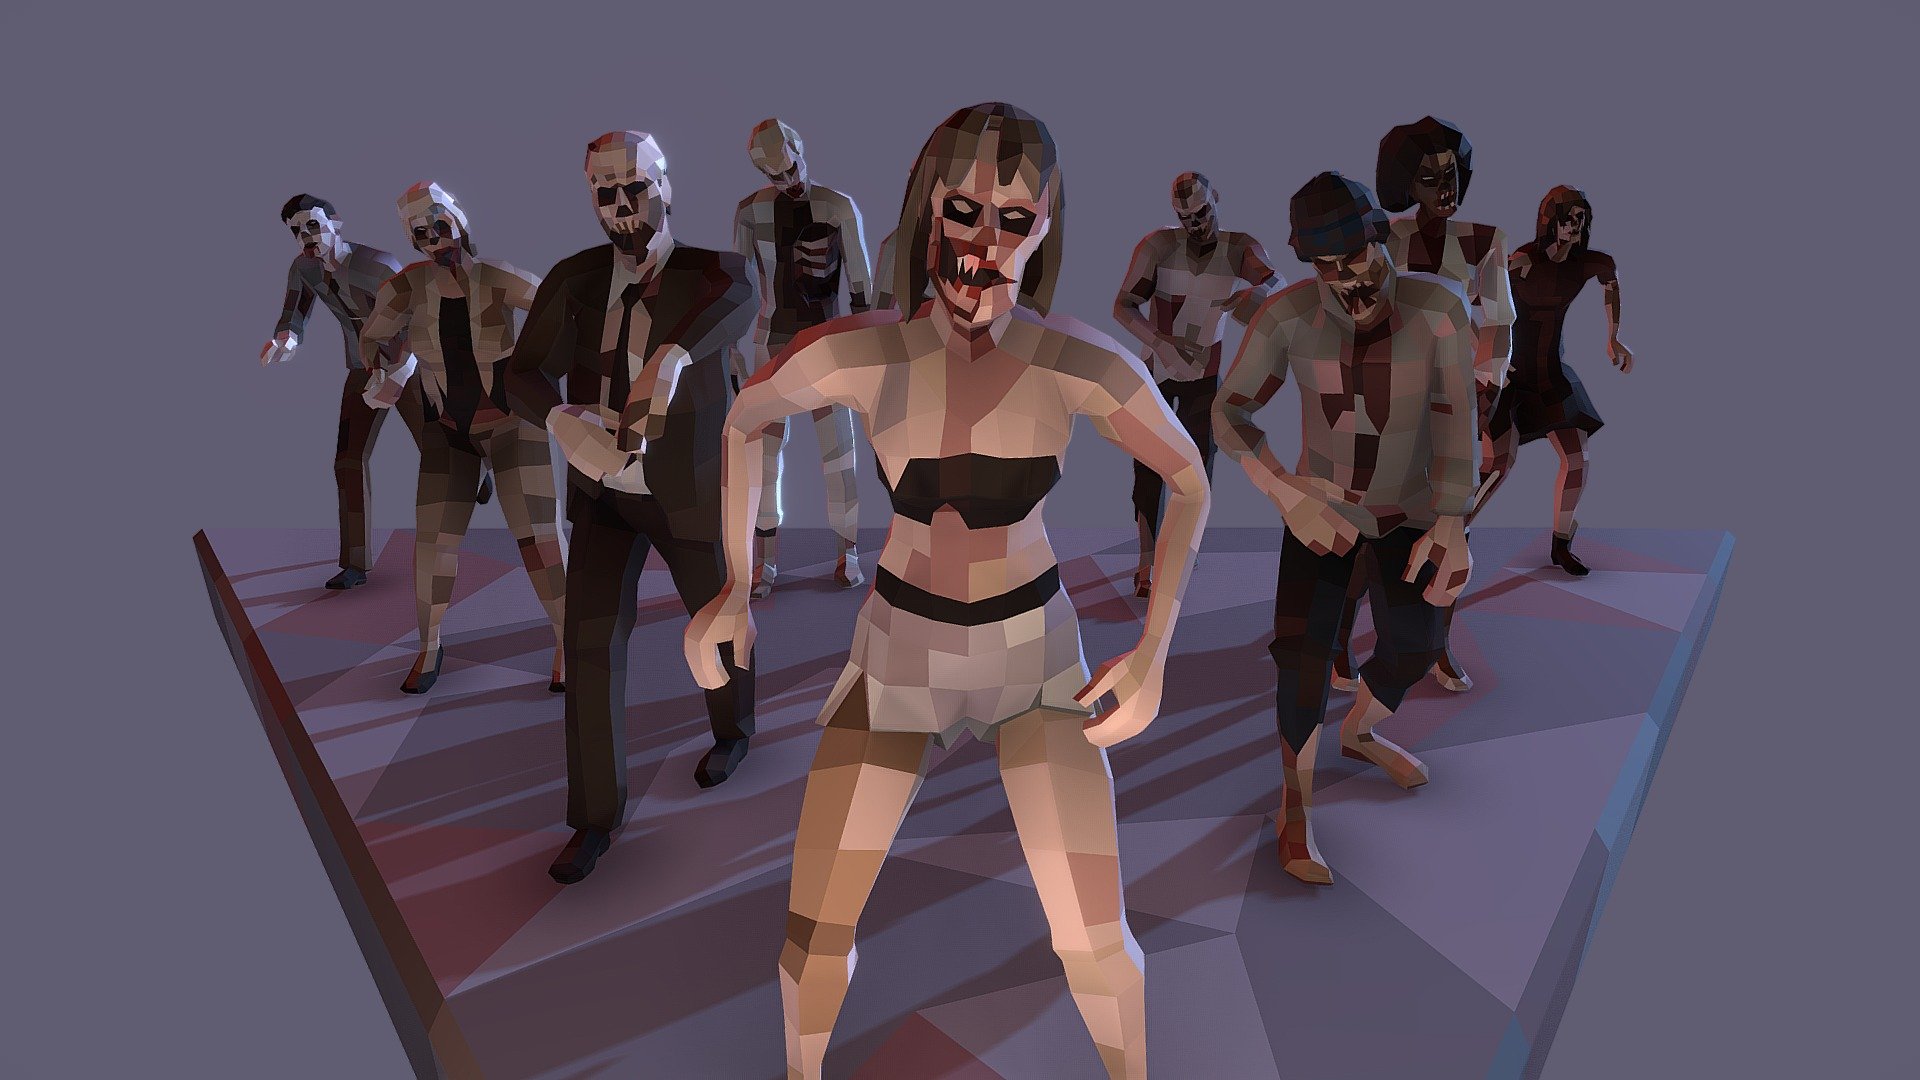 10 Low-Poly Style zombies with 10 animations ready for real-time post-apocaliptic games.

Download Additional file to get the rigs and animations as MAX, FBX and UnityPackage.

Created with 3ds Max 2016 and easy to export to any software that support FBX.

SPECS:




Average Polycount: 1000 (2000 as triangles)

Unique single texture as color palette. Painted using pX Poly Paint script

Rigged with 3ds Max Biped + Skin. Compatible with Unity Humanoid system.

ZIP file contains:




All models rigs in T-Pose as .MAX and .FBX.

All animations as .MAX, .FBX and .BIP.

Clean modes without rig as .MAX, .FBX and .OBJ. 

Unity package.

Enjoy! - Polygonal Zombies with Animations Free Pack - Download Free 3D model by Denys Almaral (@denysalmaral) 3d model